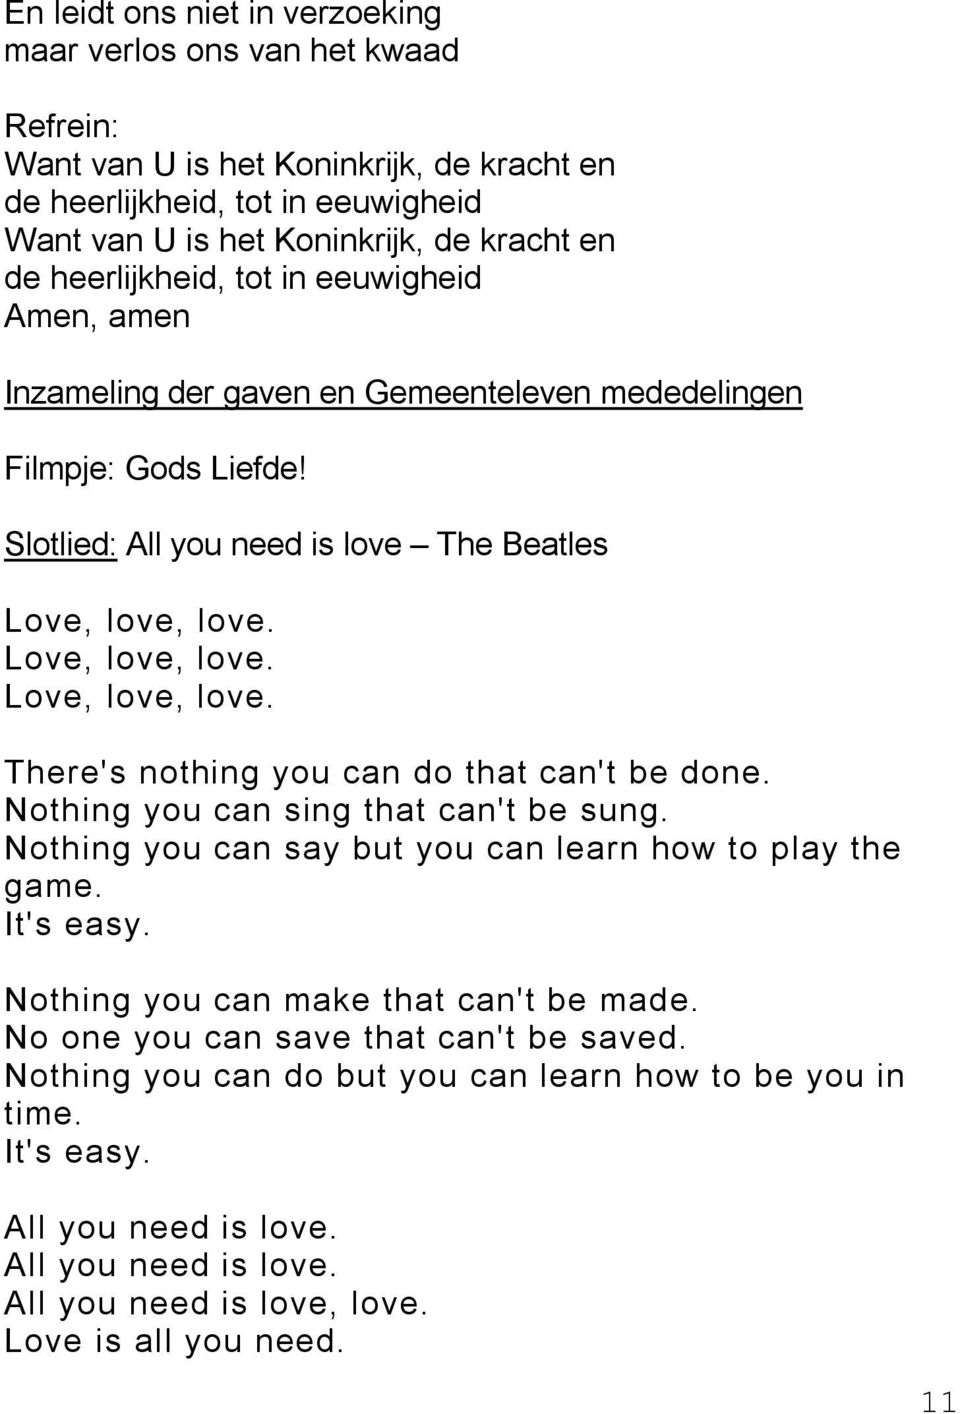 Love, love, love. Love, love, love. There's nothing you can do that can't be done. Nothing you can sing that can't be sung. Nothing you can say but you can learn how to play the game. It's easy.